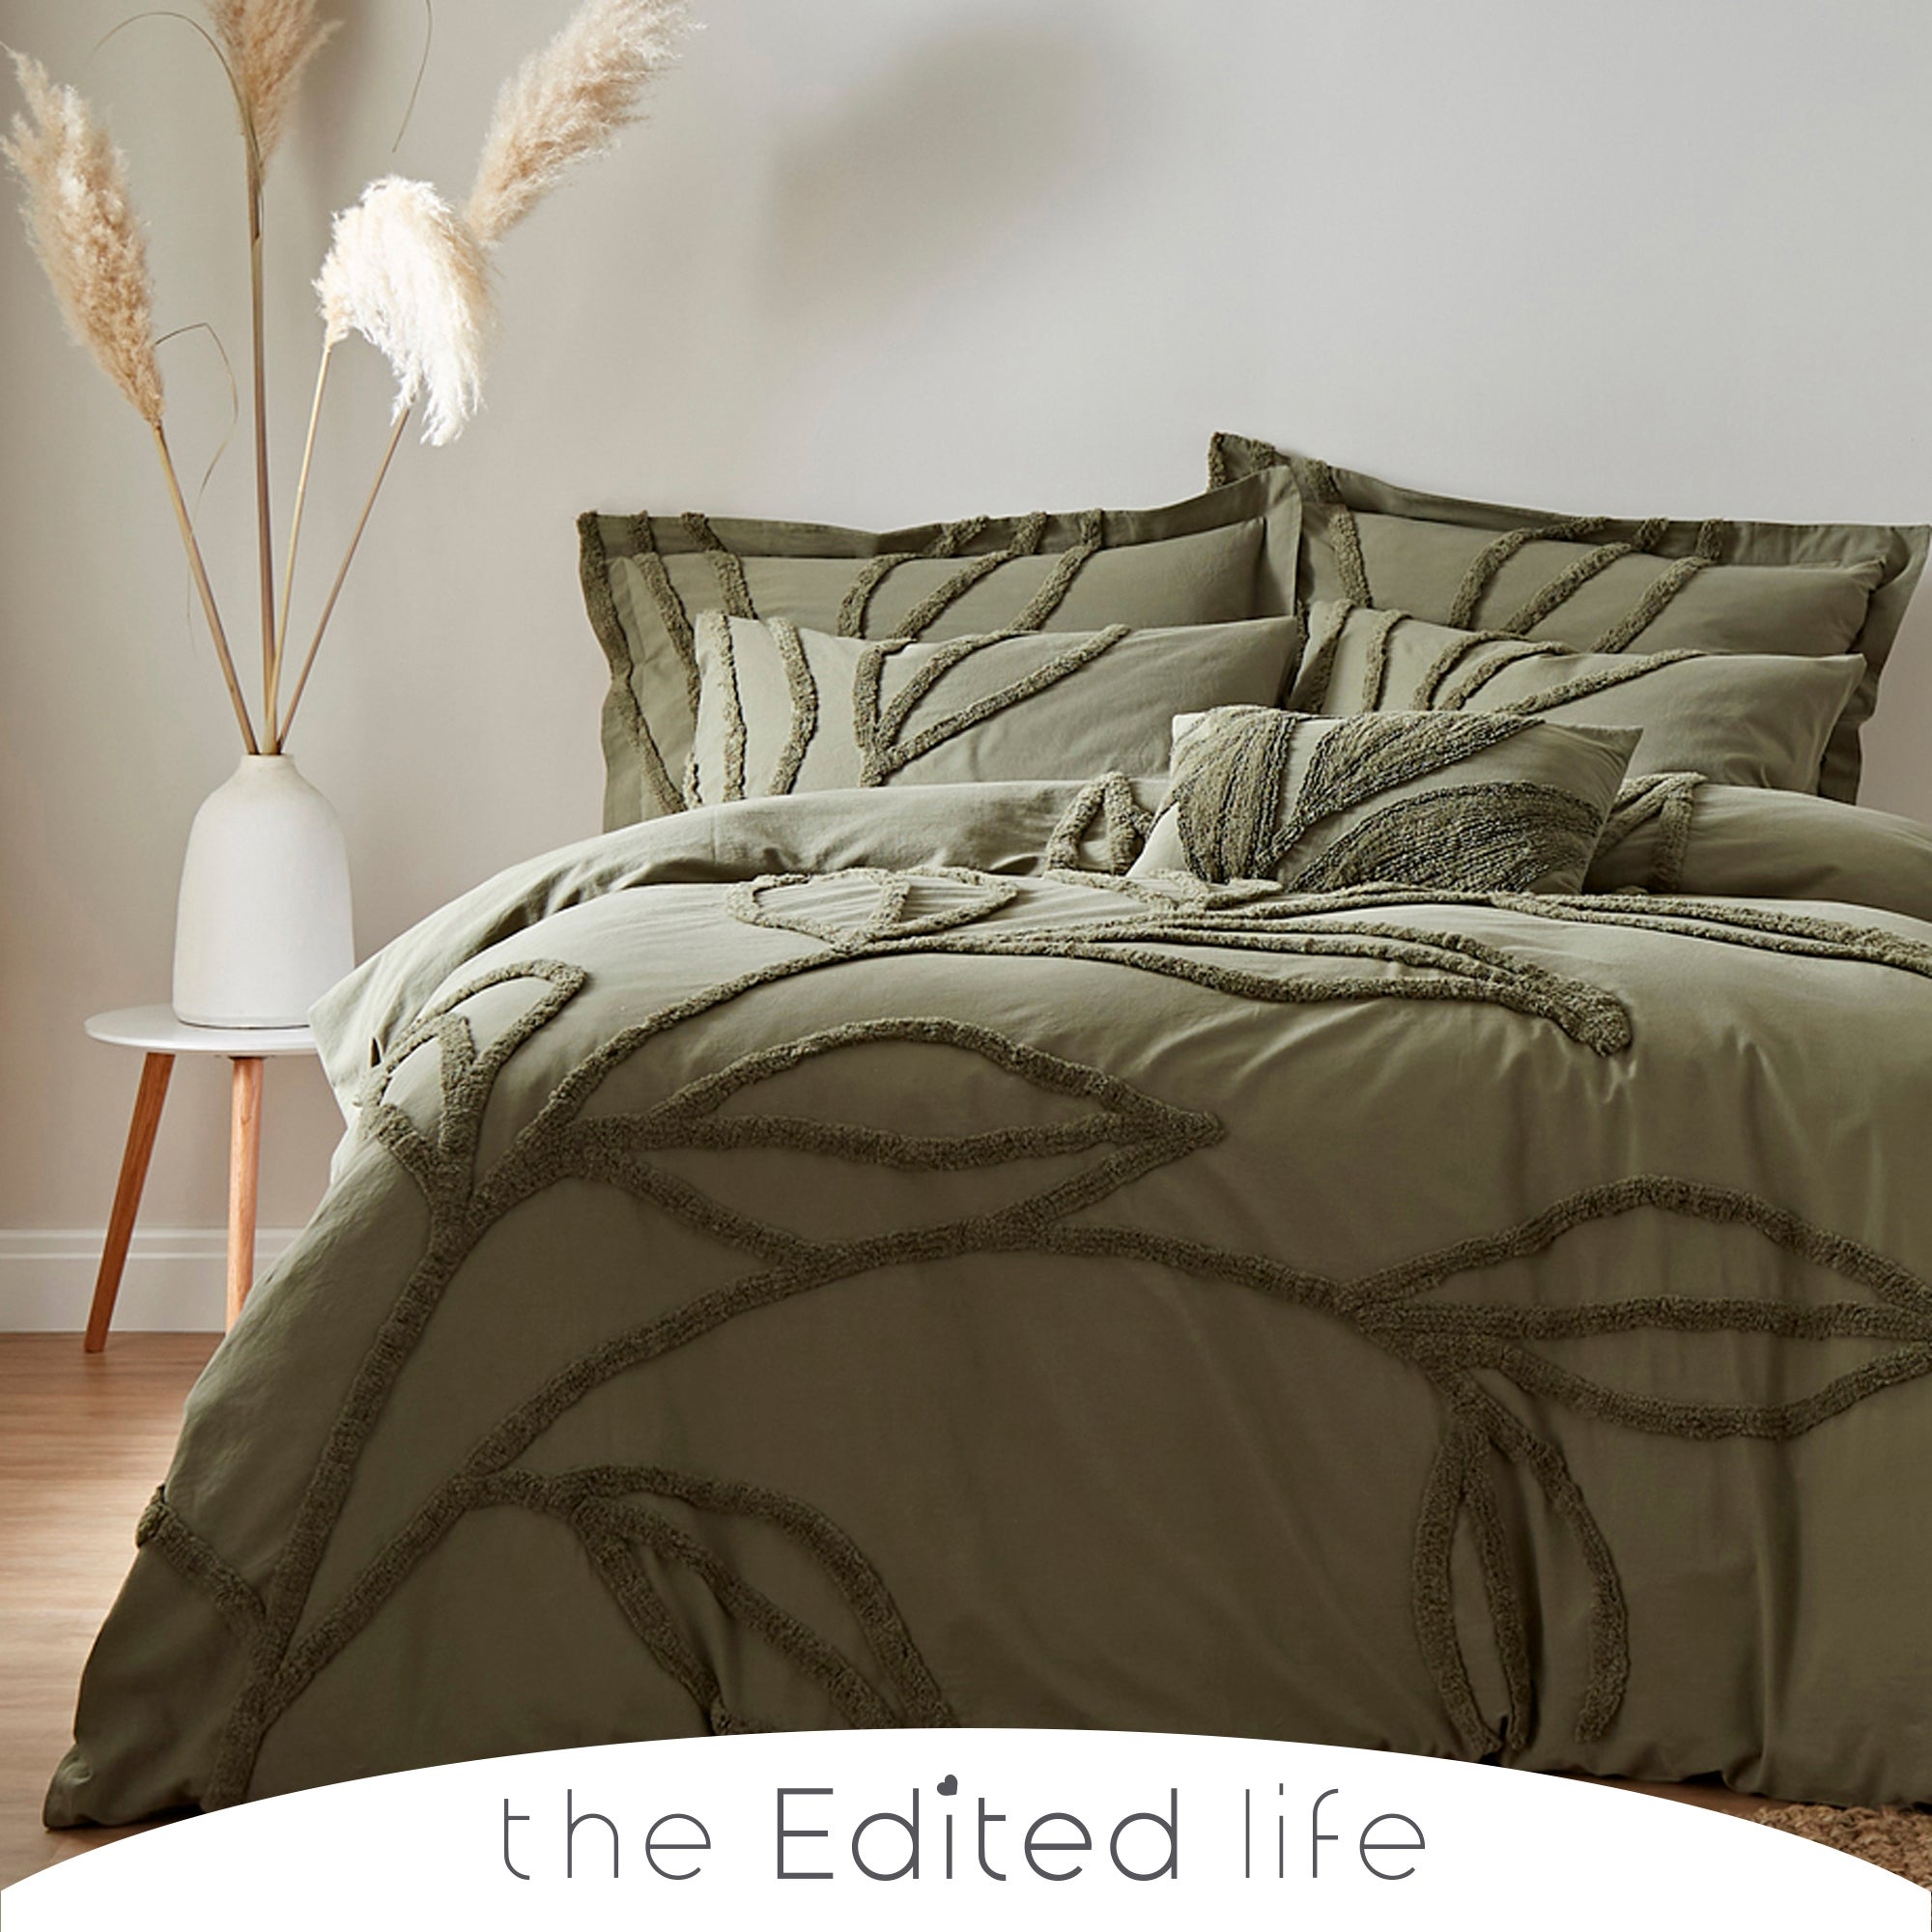 Tufted Leaf Olive 100% Organic Cotton Duvet Cover and Pillowcase Set Green